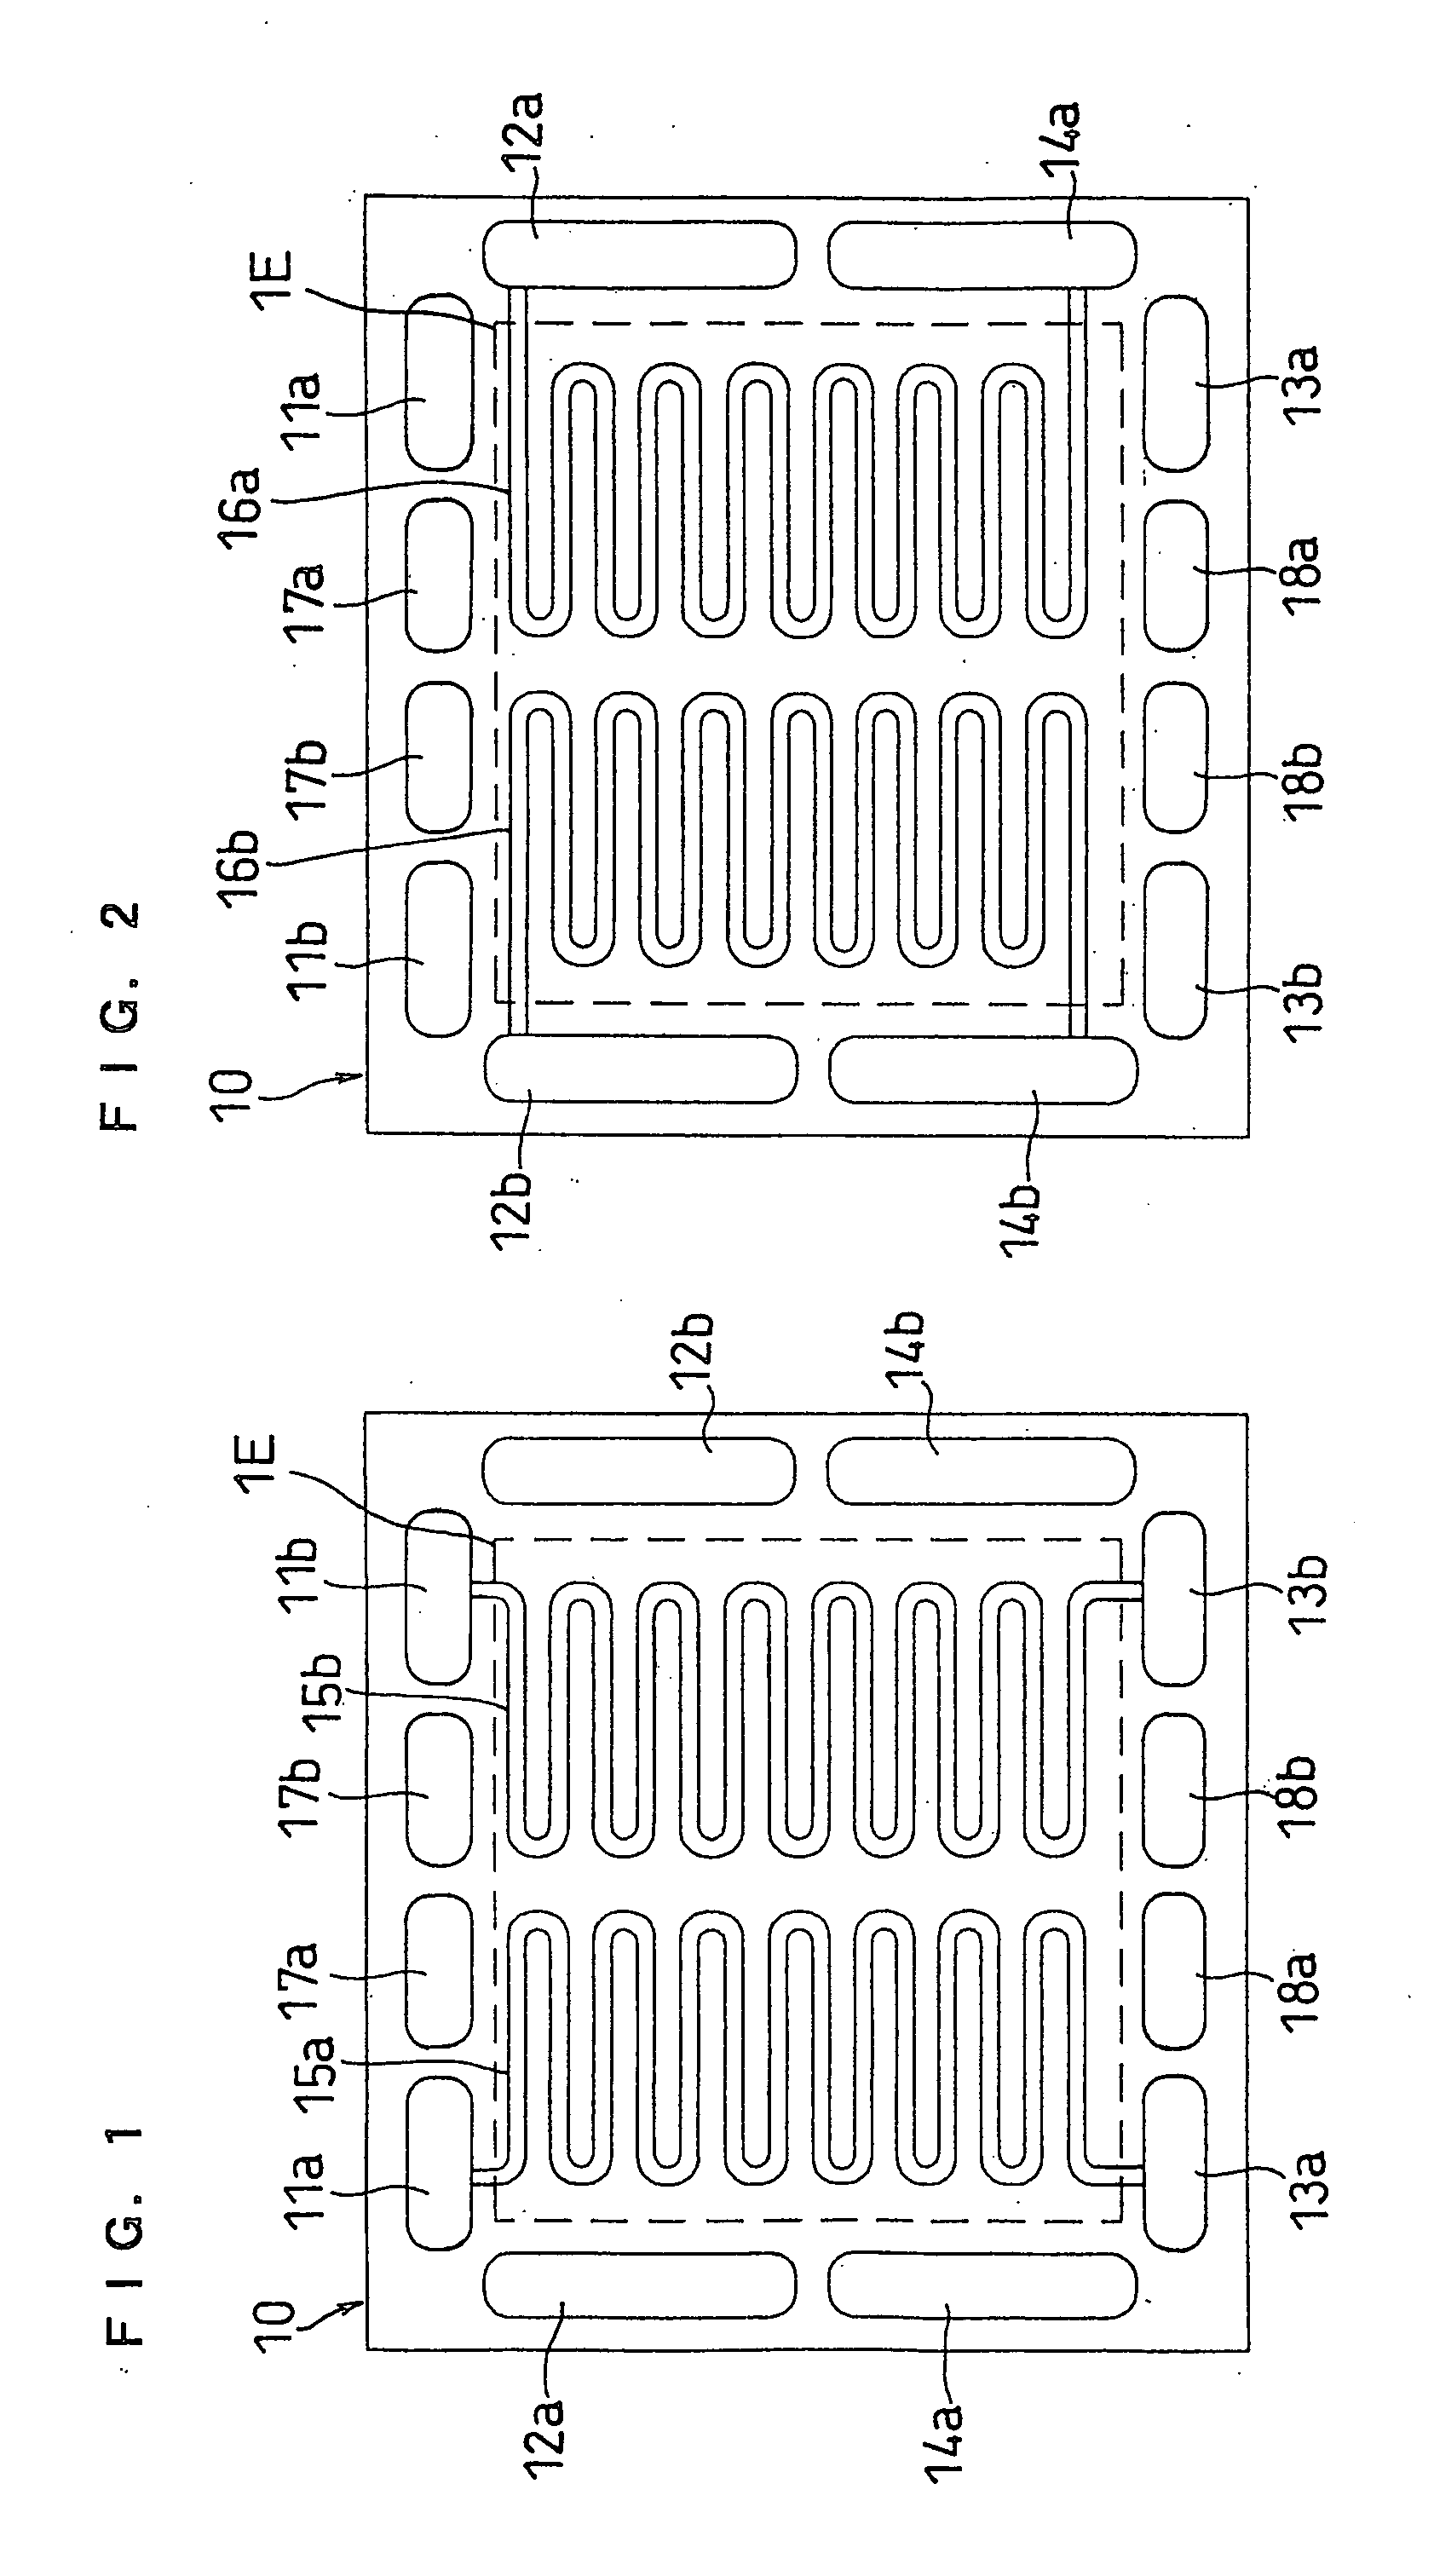 Fuel cell, separator plate for a fuel cell, and method of operation of a fuel cell